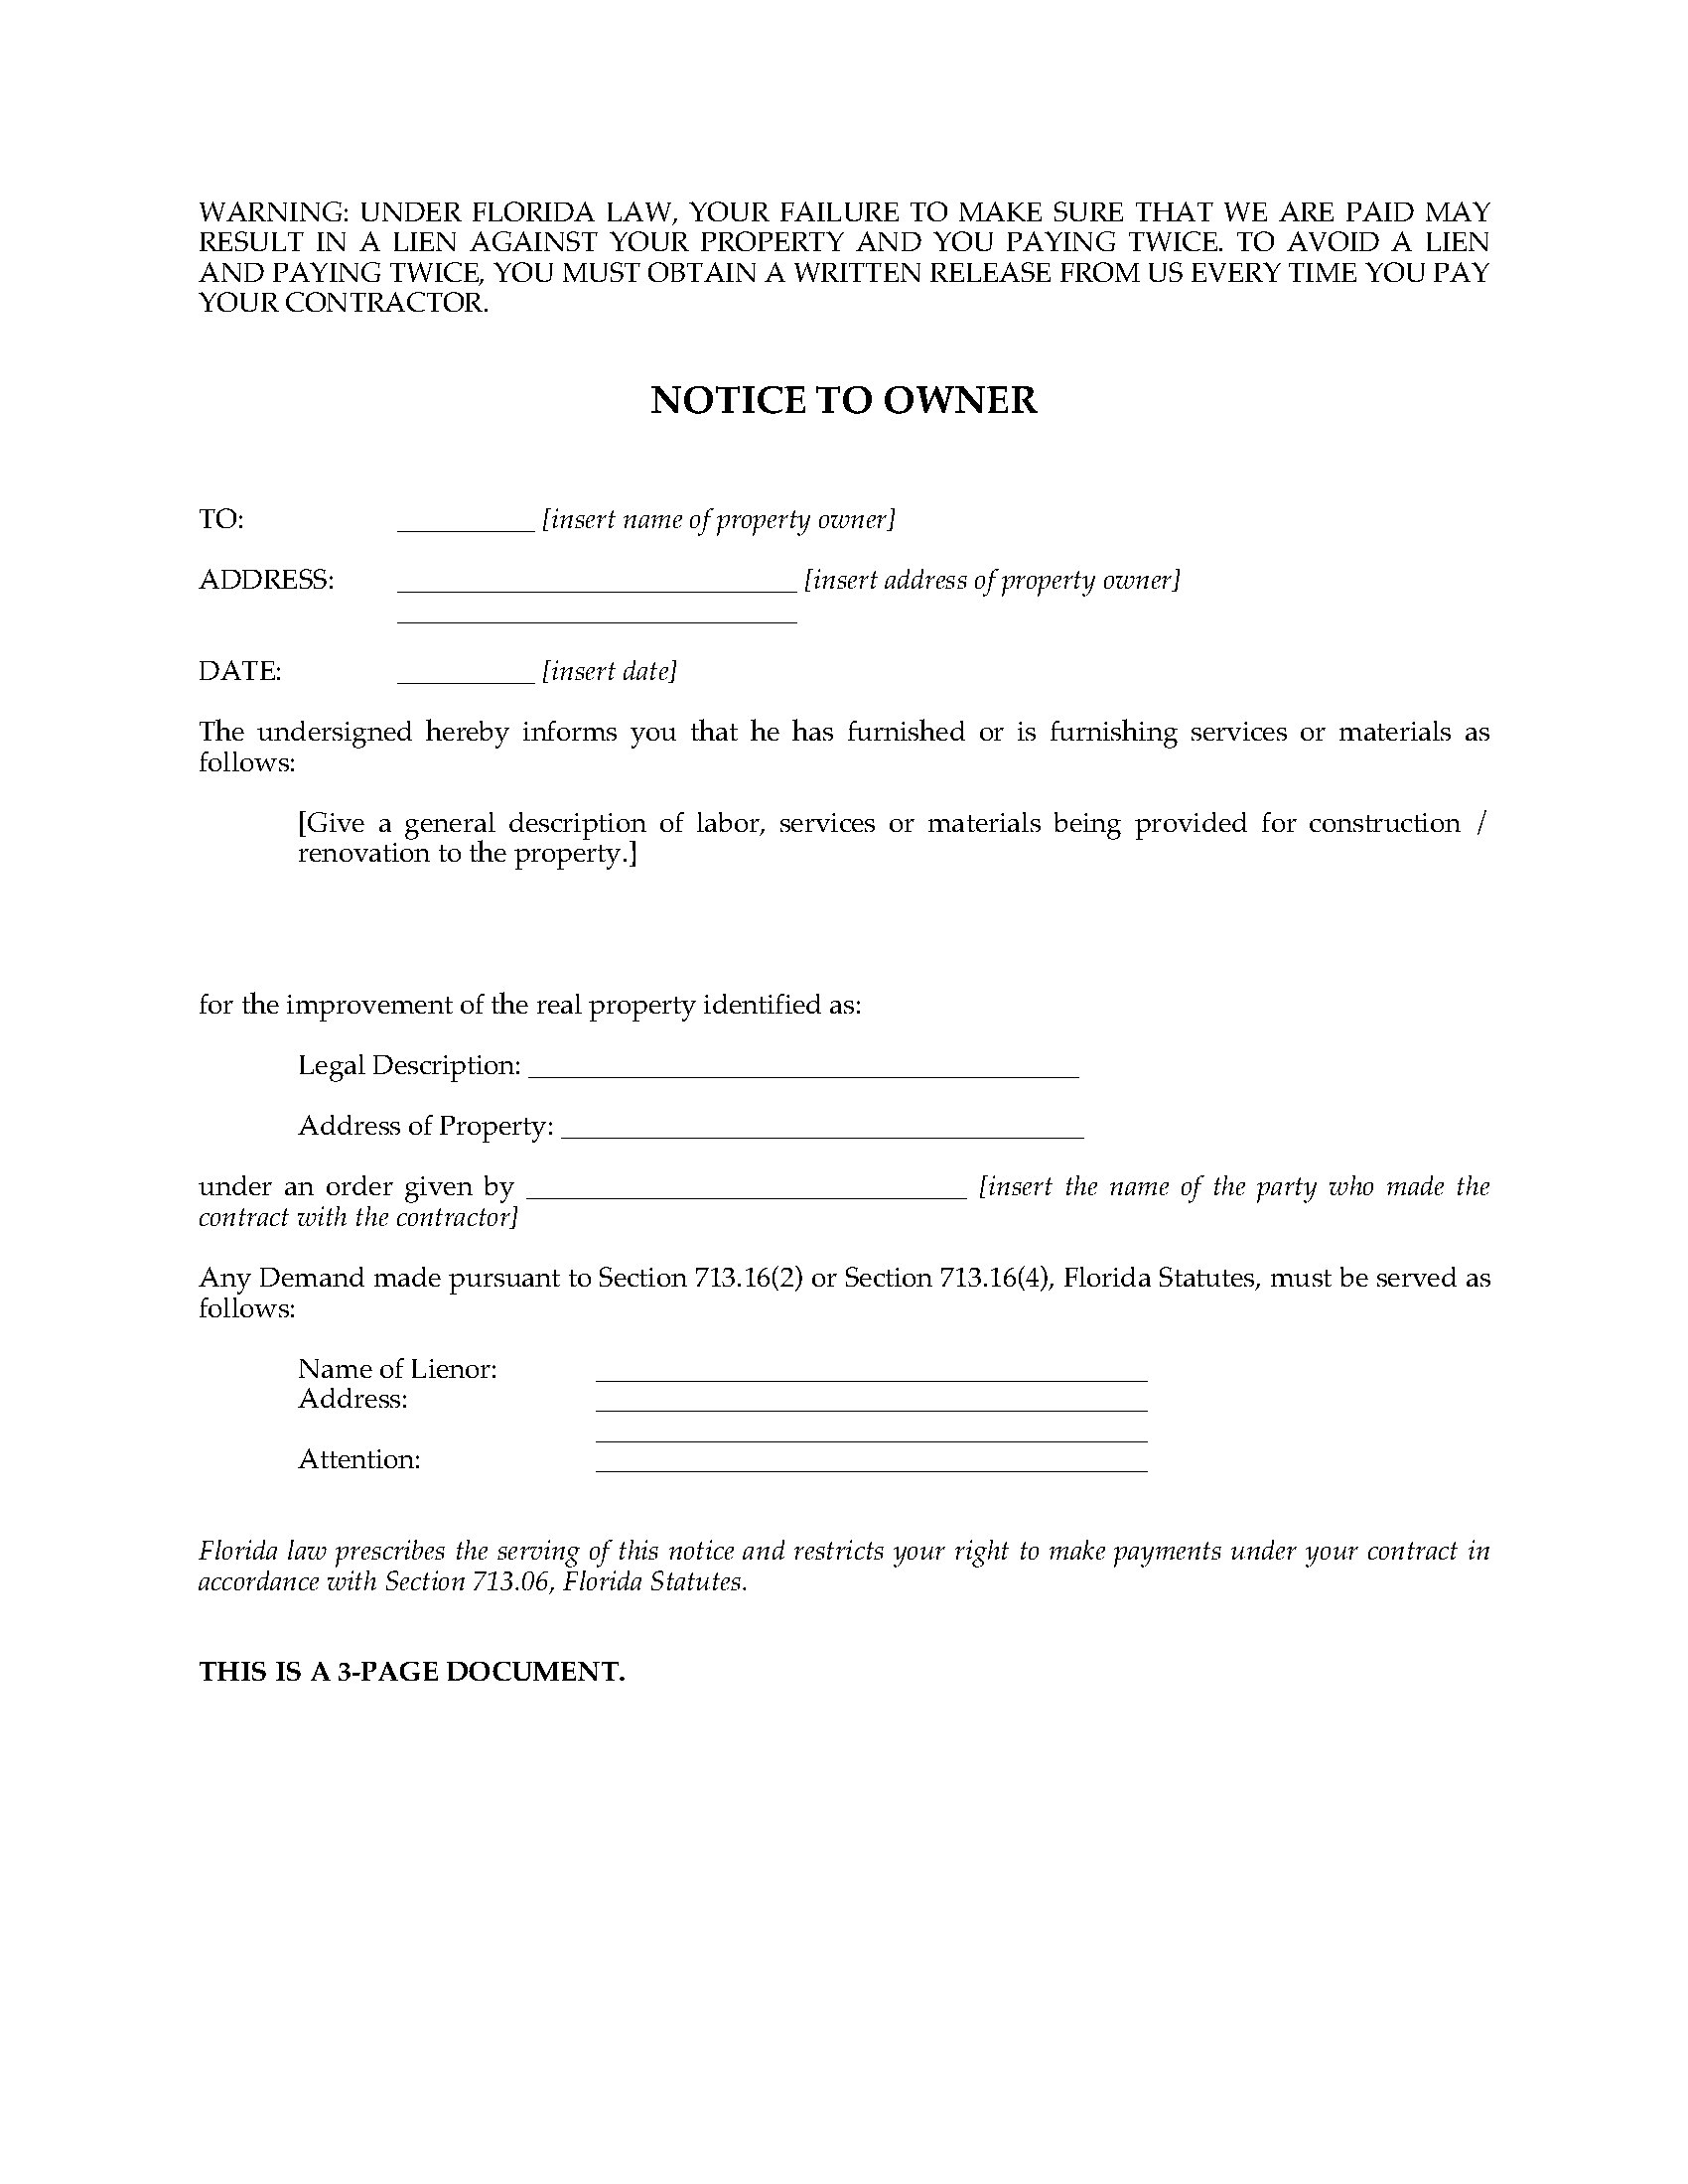 florida-notice-to-owner-legal-forms-and-business-templates-megadox